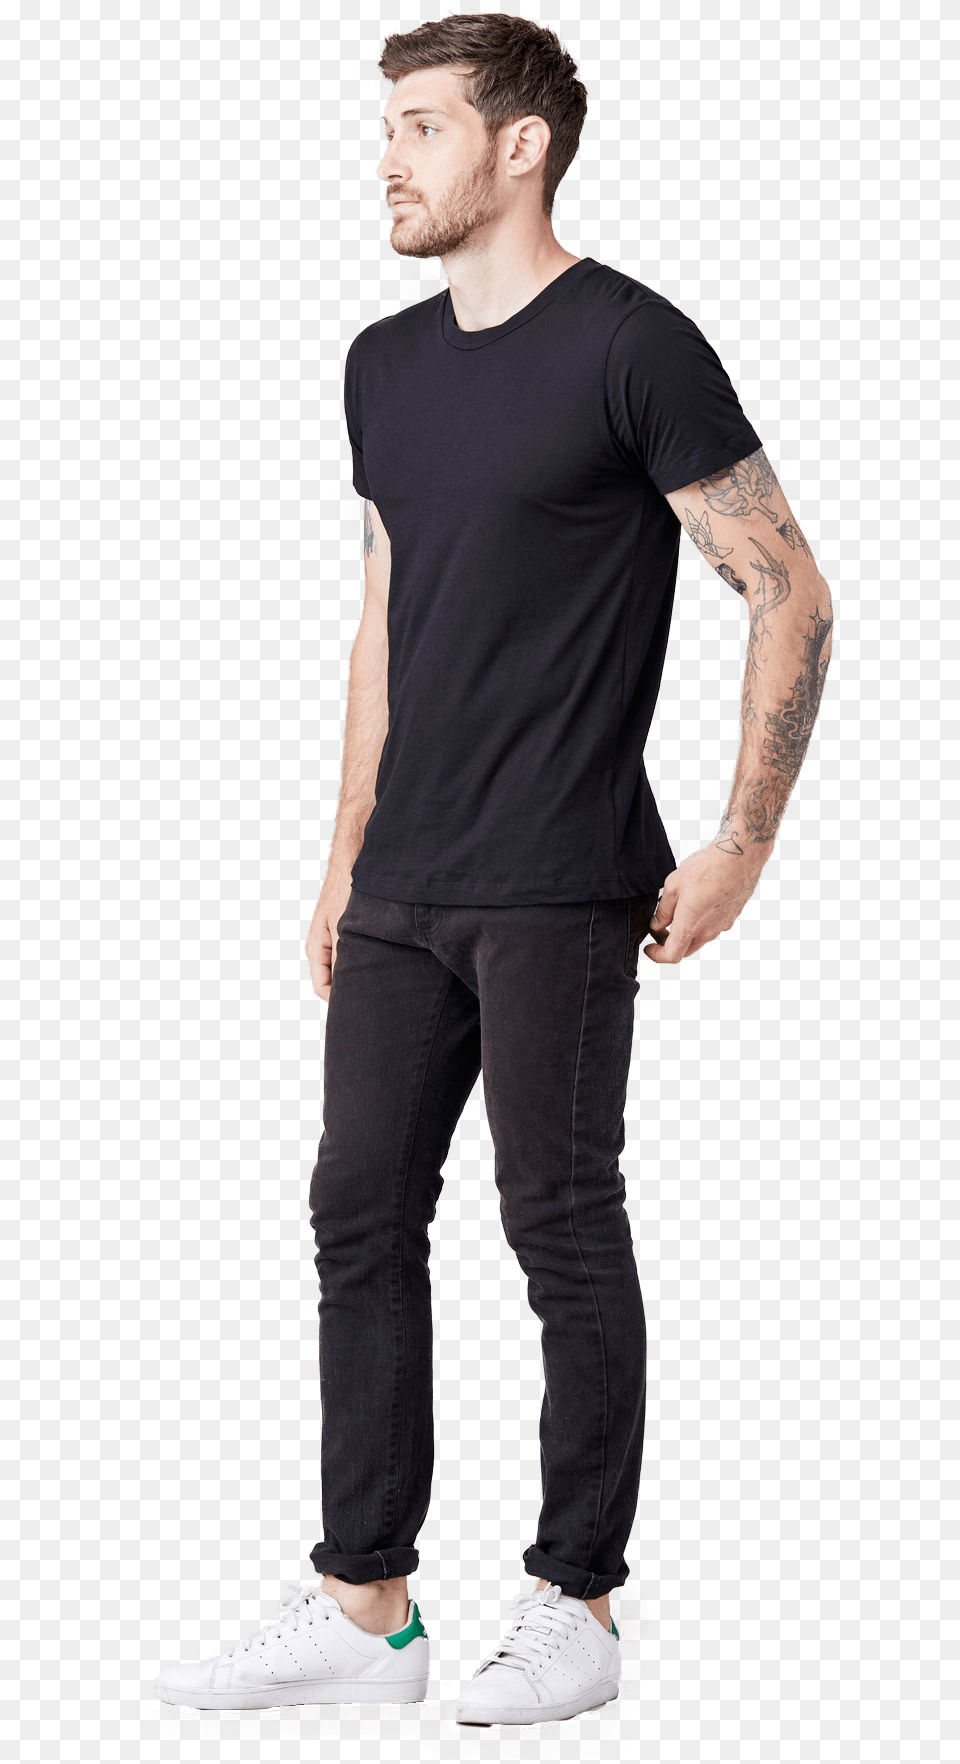 Thumb Image Cut Out People Stand, Tattoo, Sleeve, Skin, Shoe Free Transparent Png